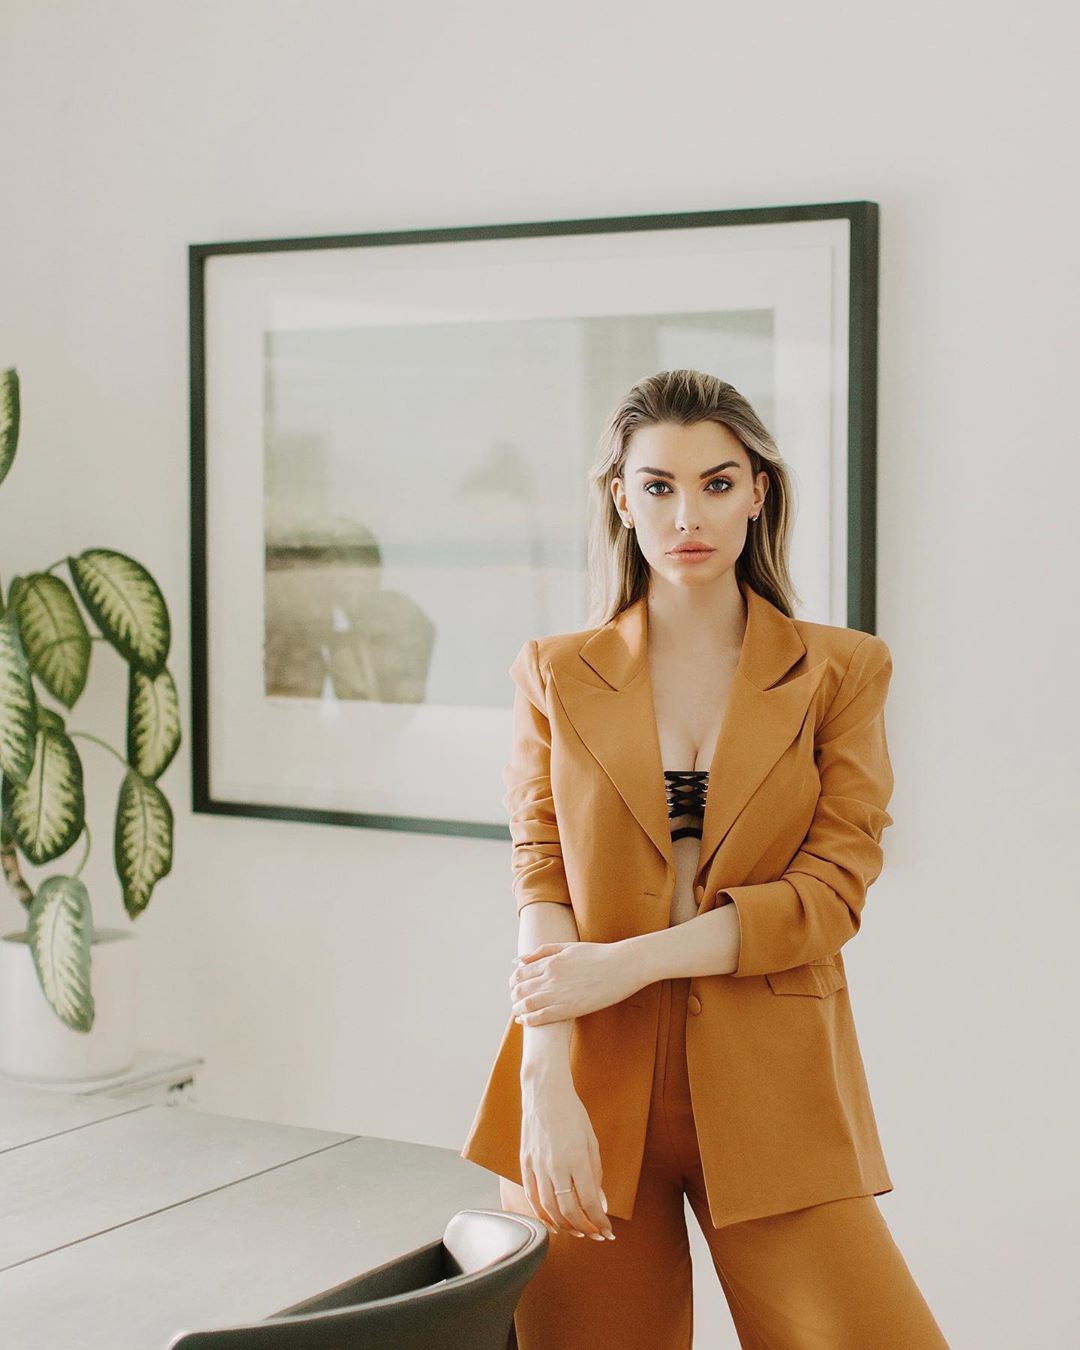 Yellow and beige jacket, blazer, top: Yellow And Beige Outfit,  Australian Model Emily Sears,  Beige Suit  